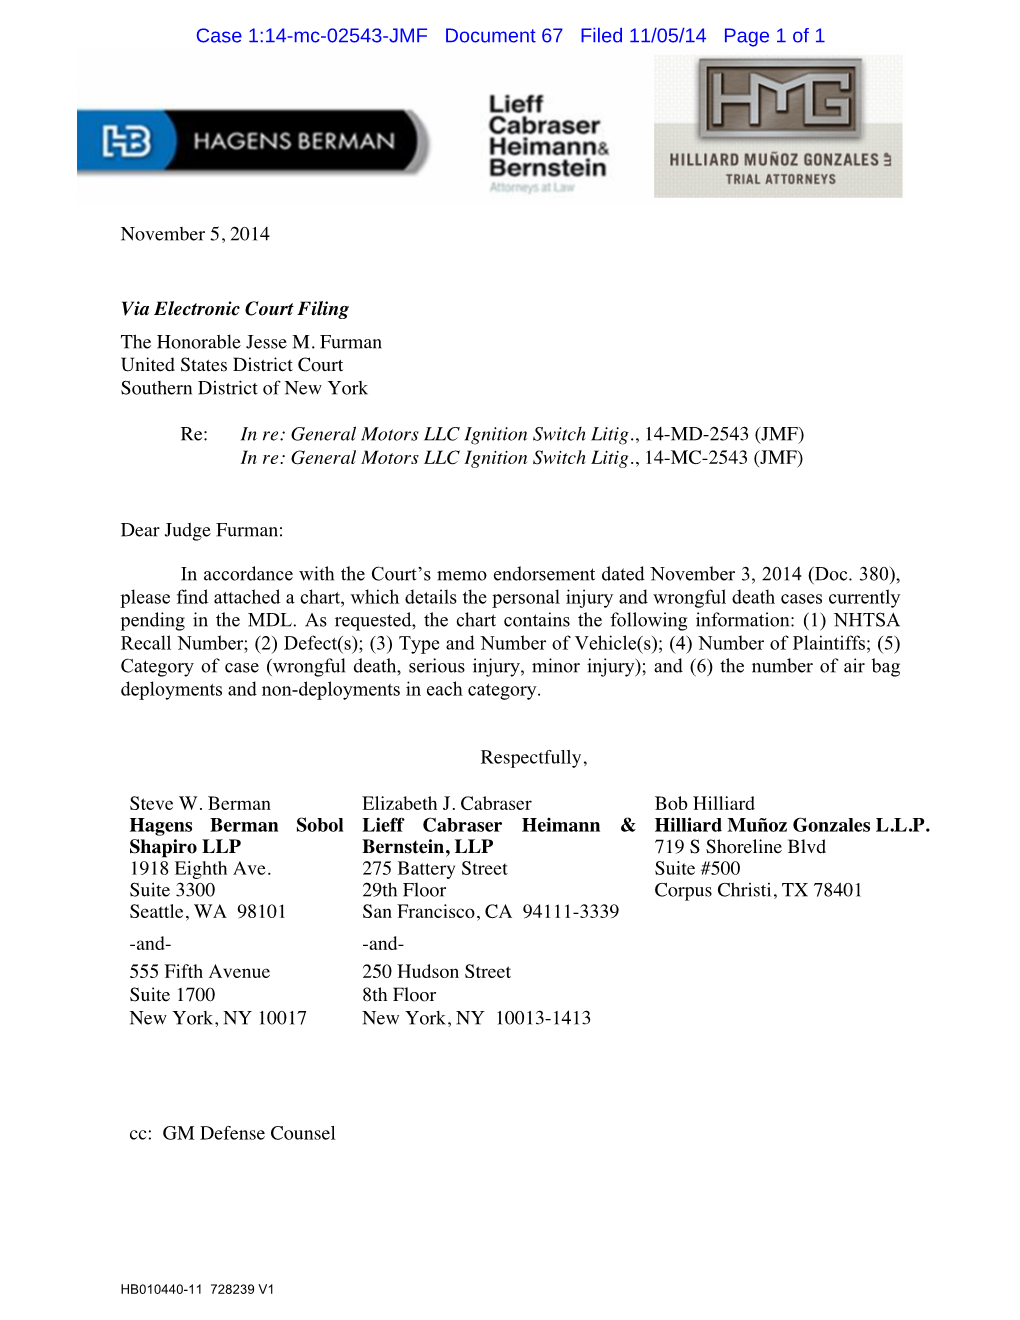 November 5, 2014 Via Electronic Court Filing the Honorable Jesse